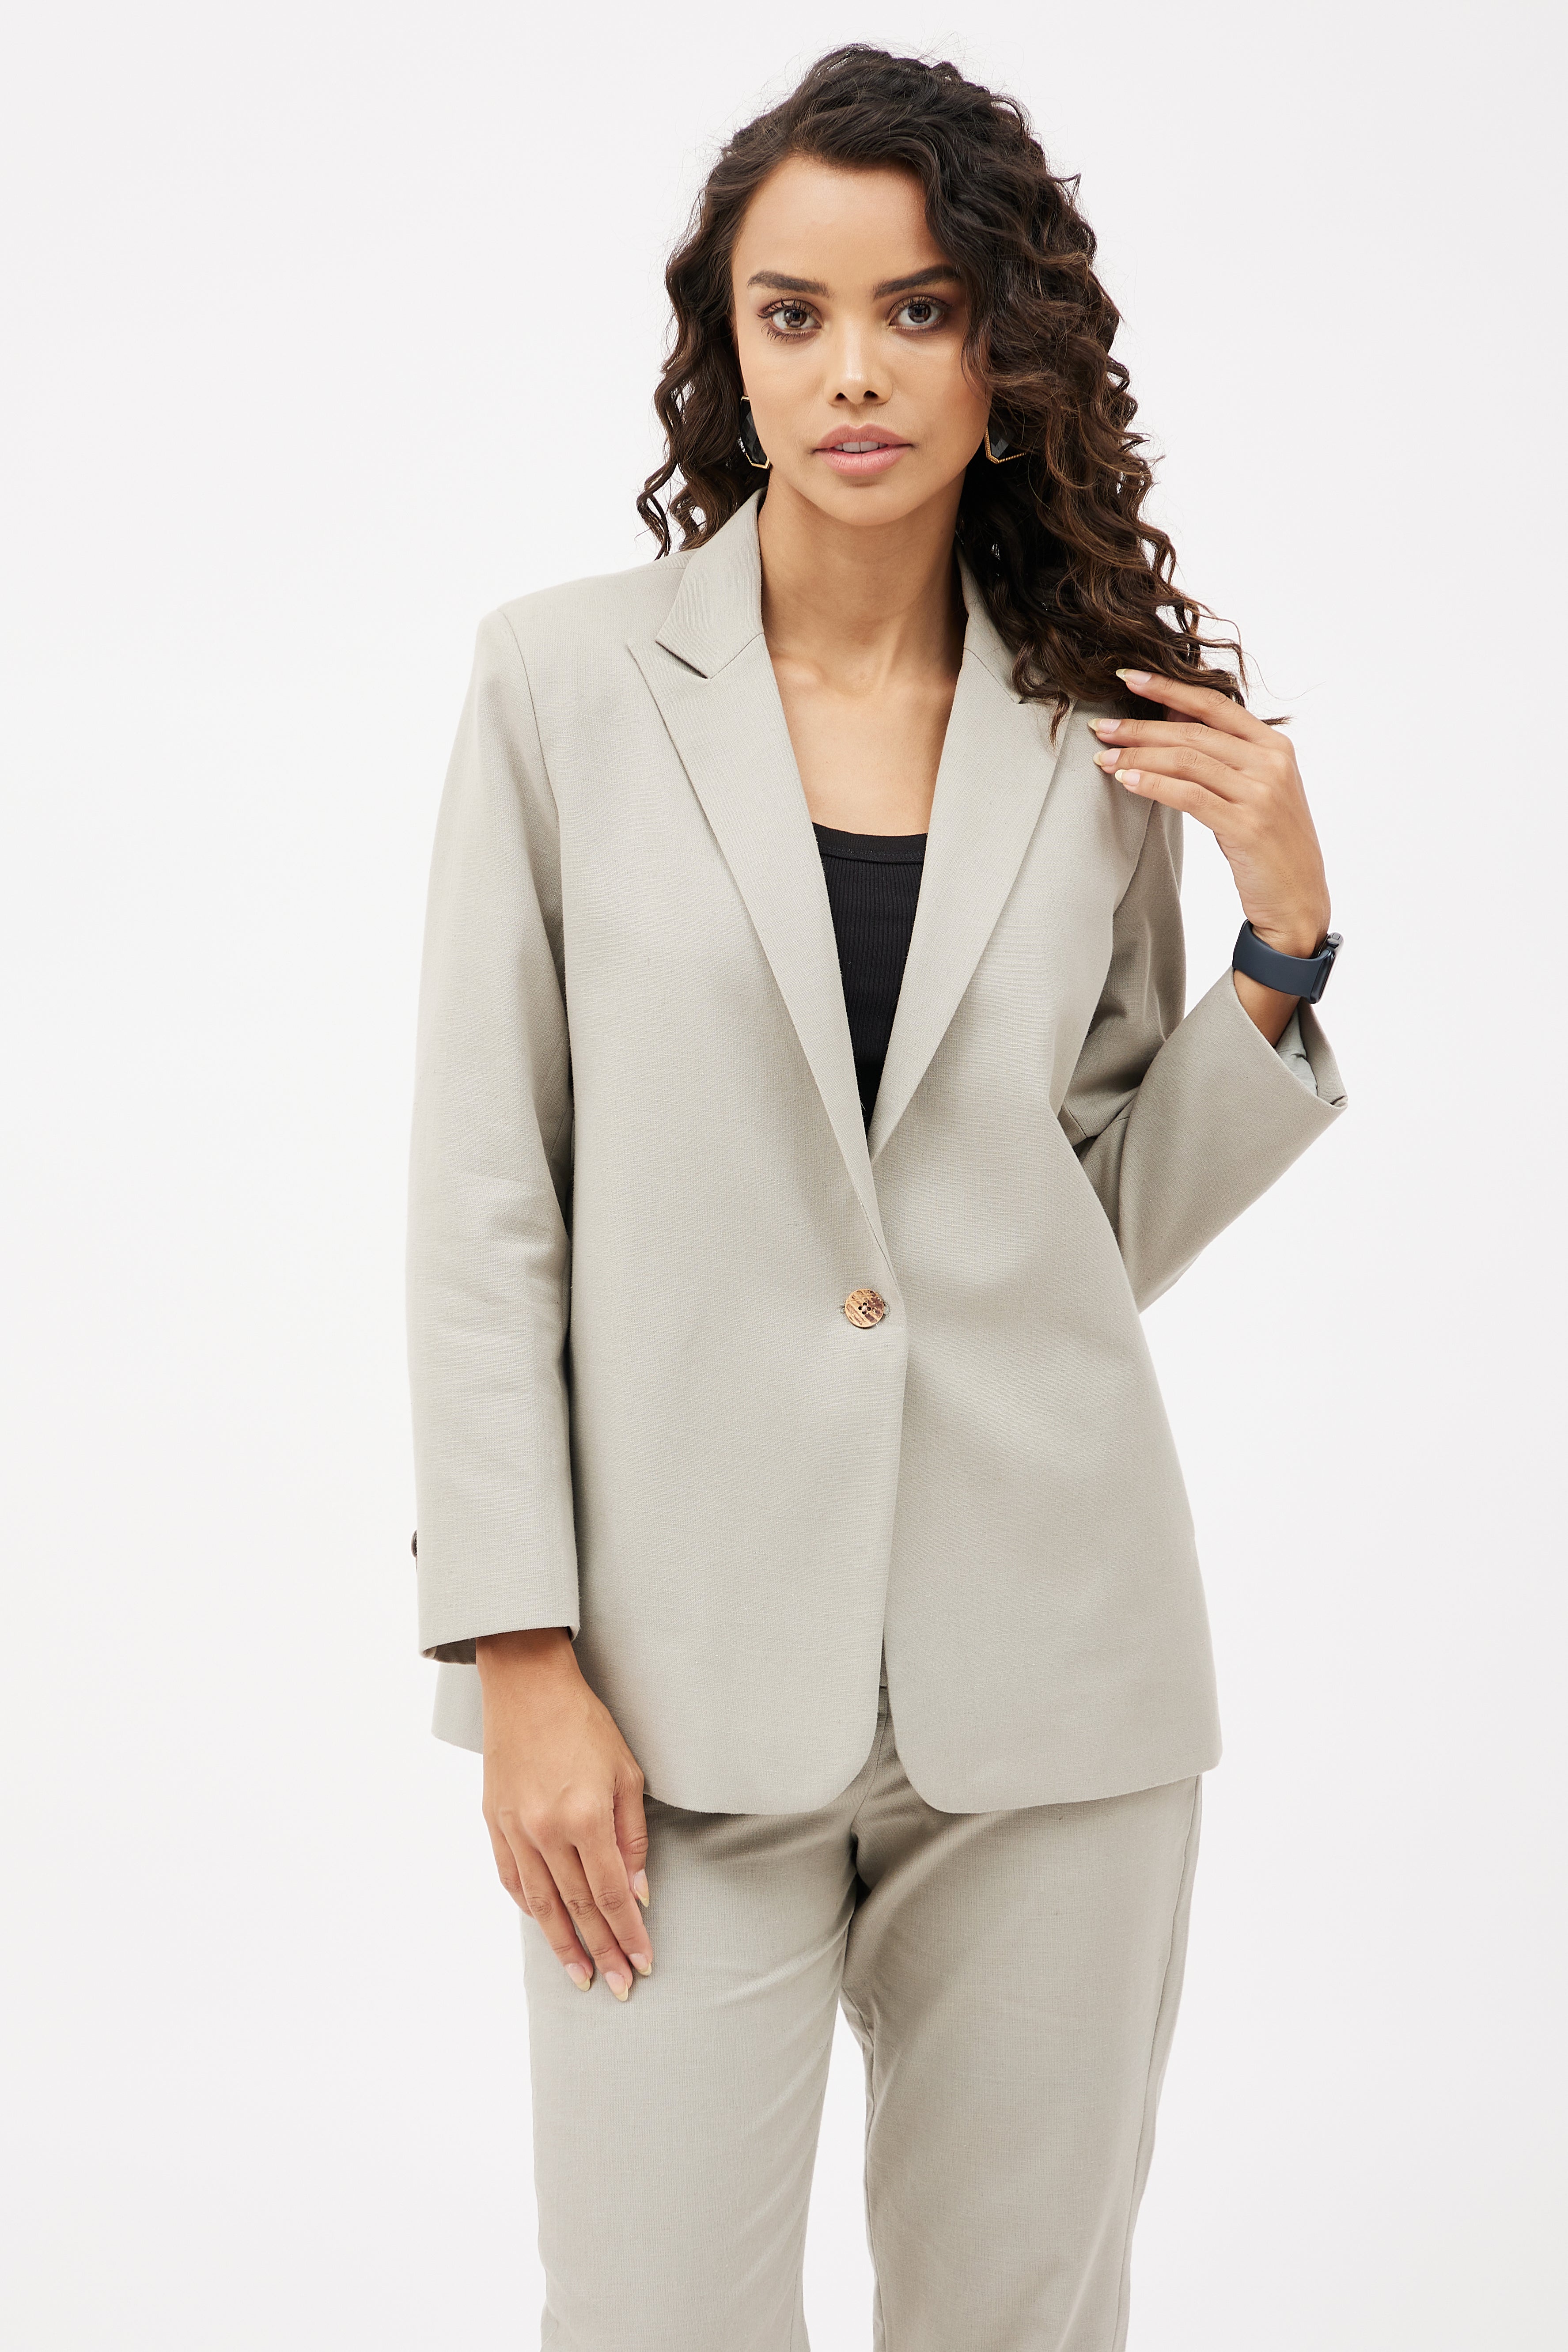 Plus Size Suits For Women | PrettyLittleThing USA